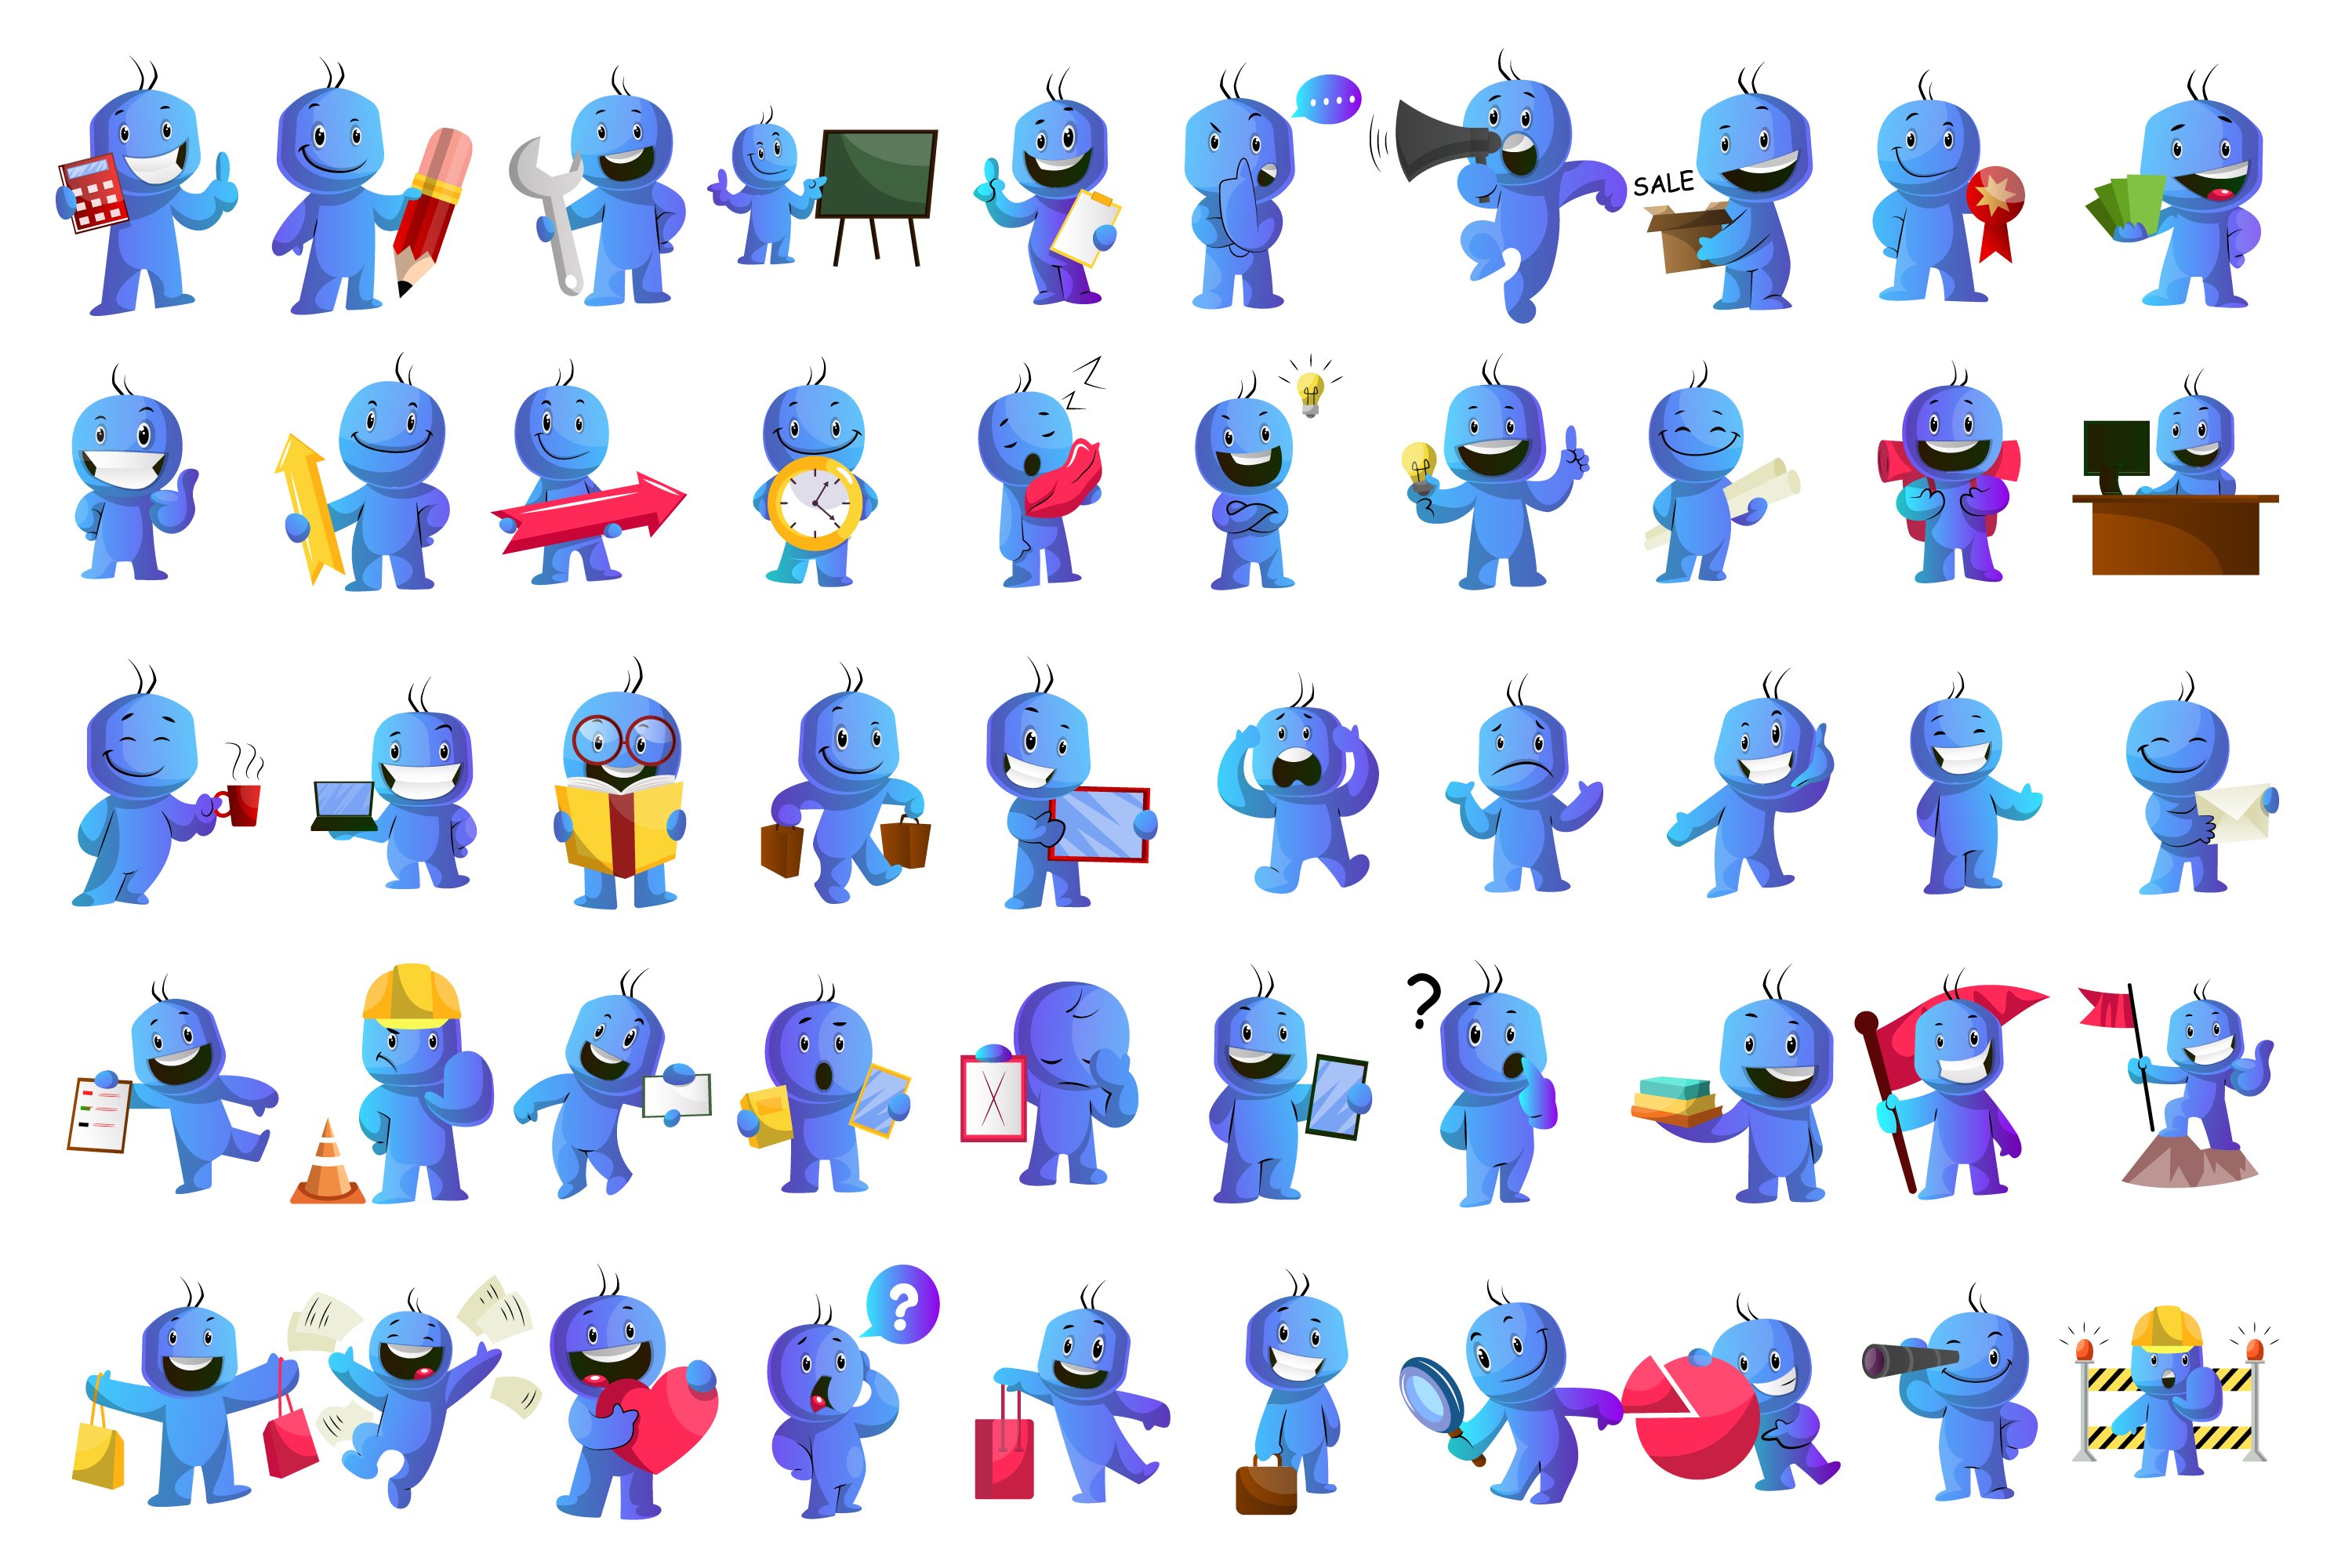 Diverse of blue man mood and emotions for your illustrations.